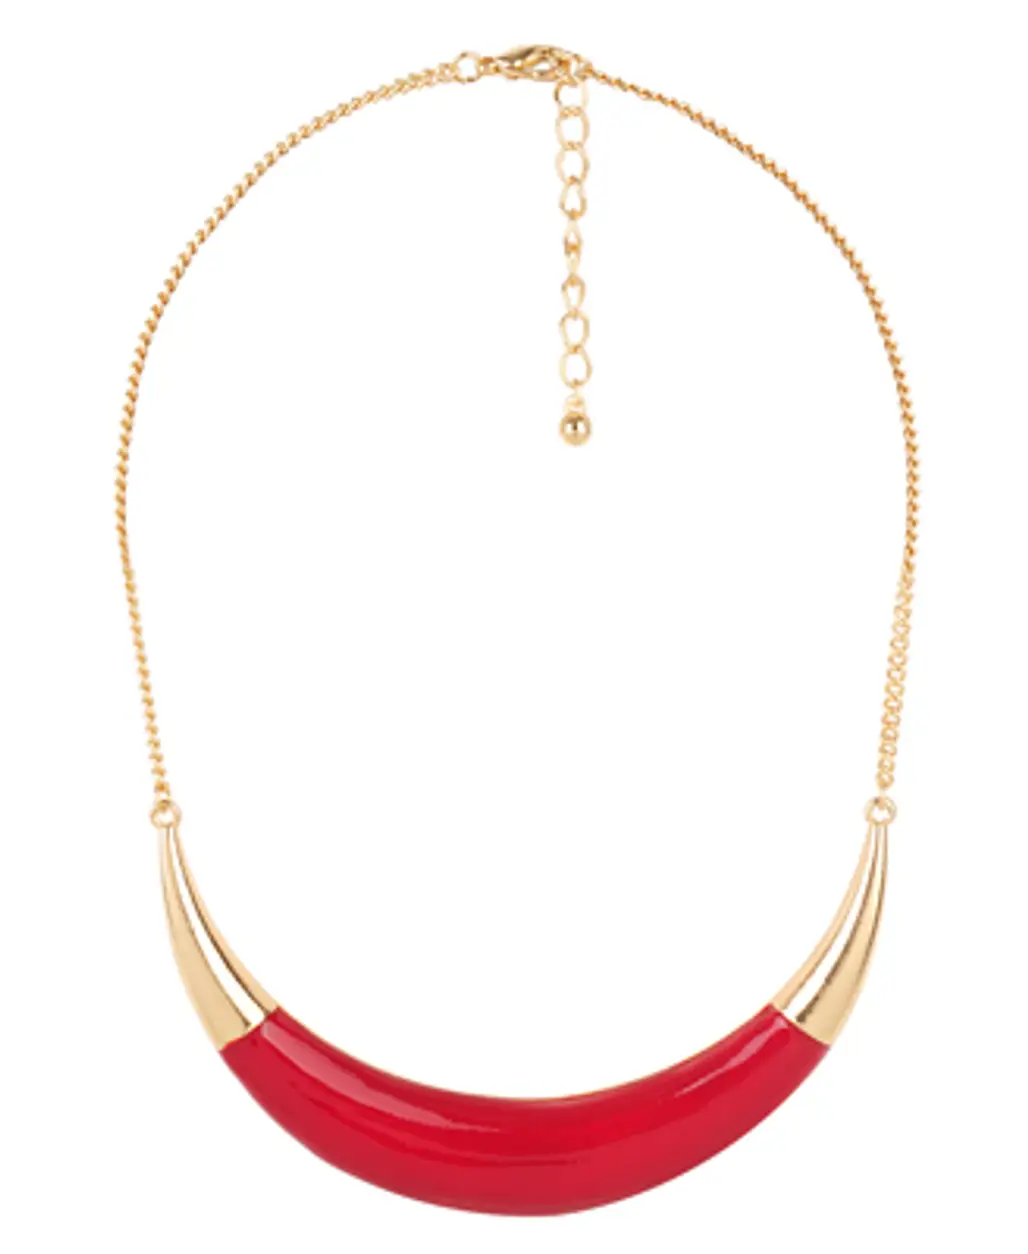 Lacquered Bib Necklace